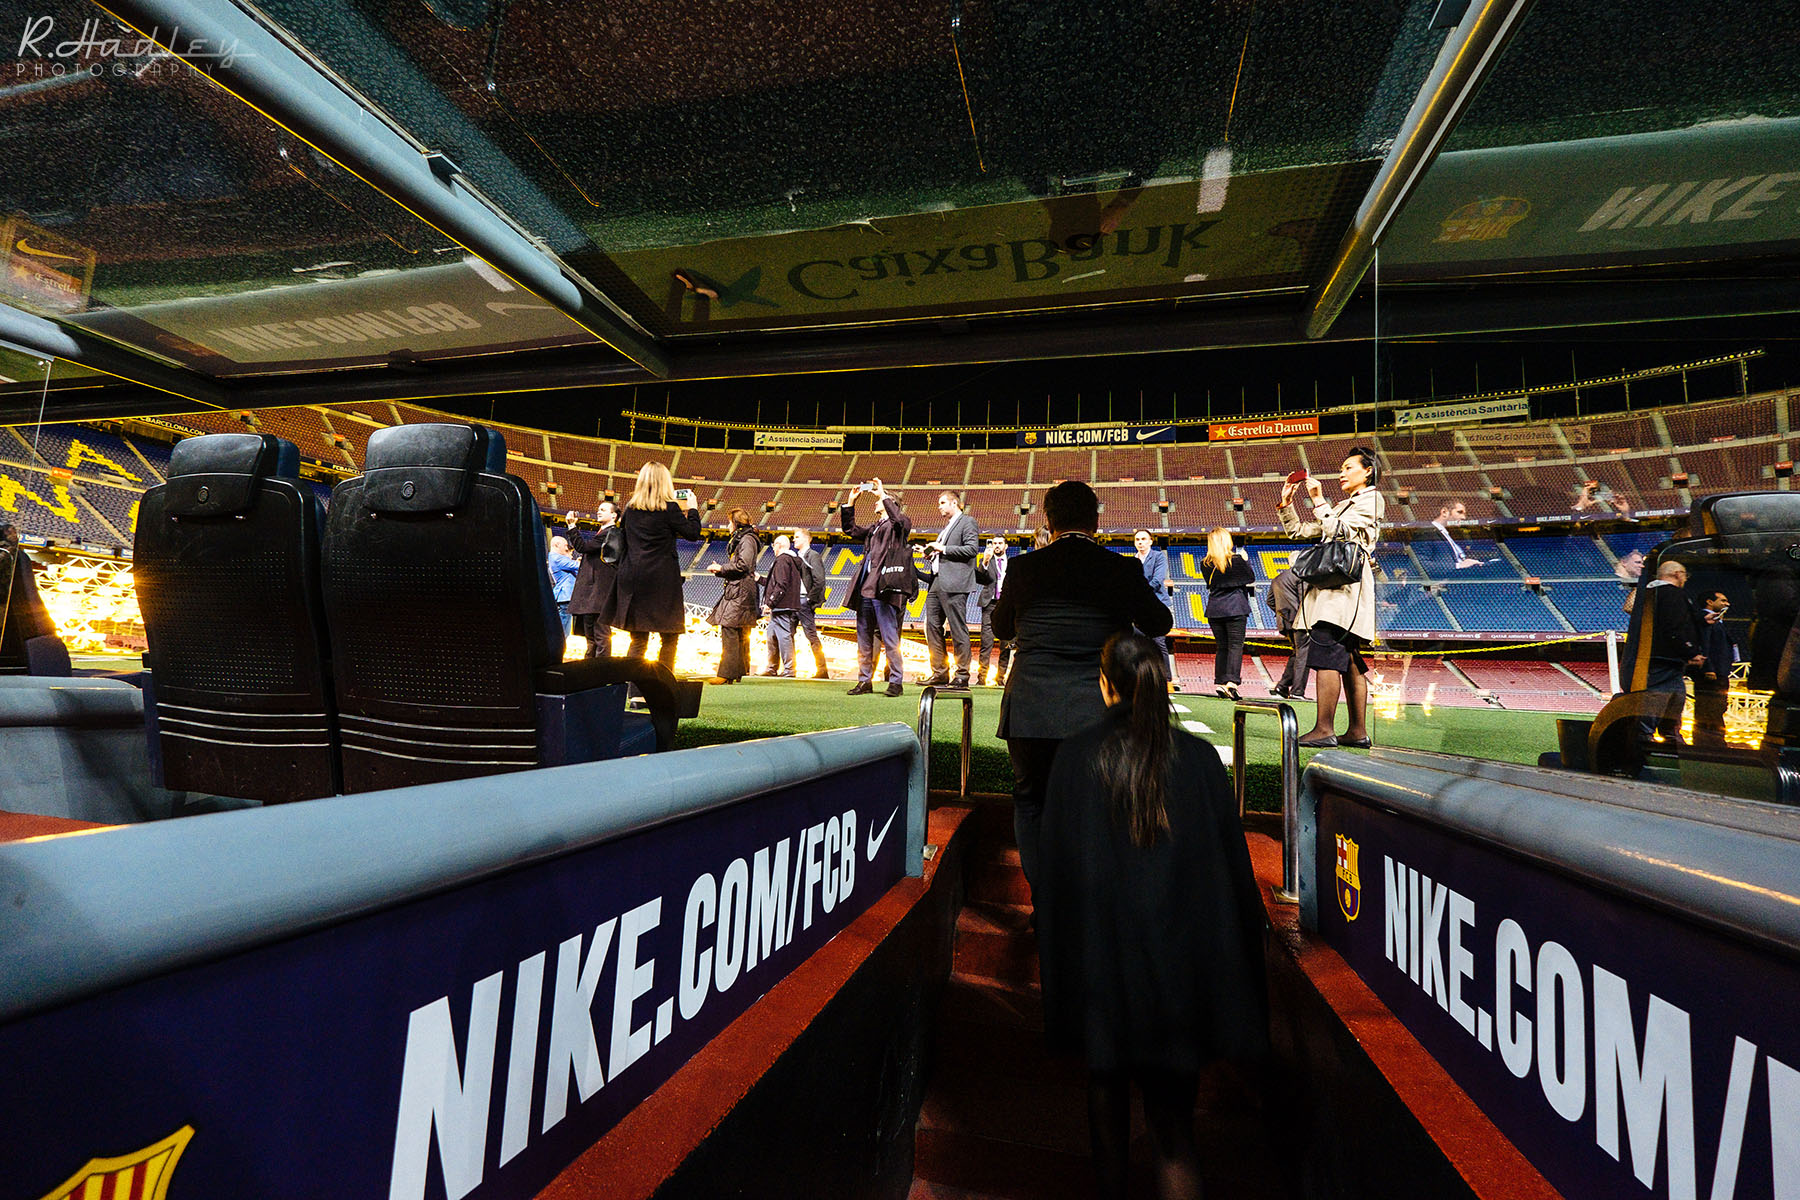 Corporate Event Photographer at Camp Nou in Barcelona